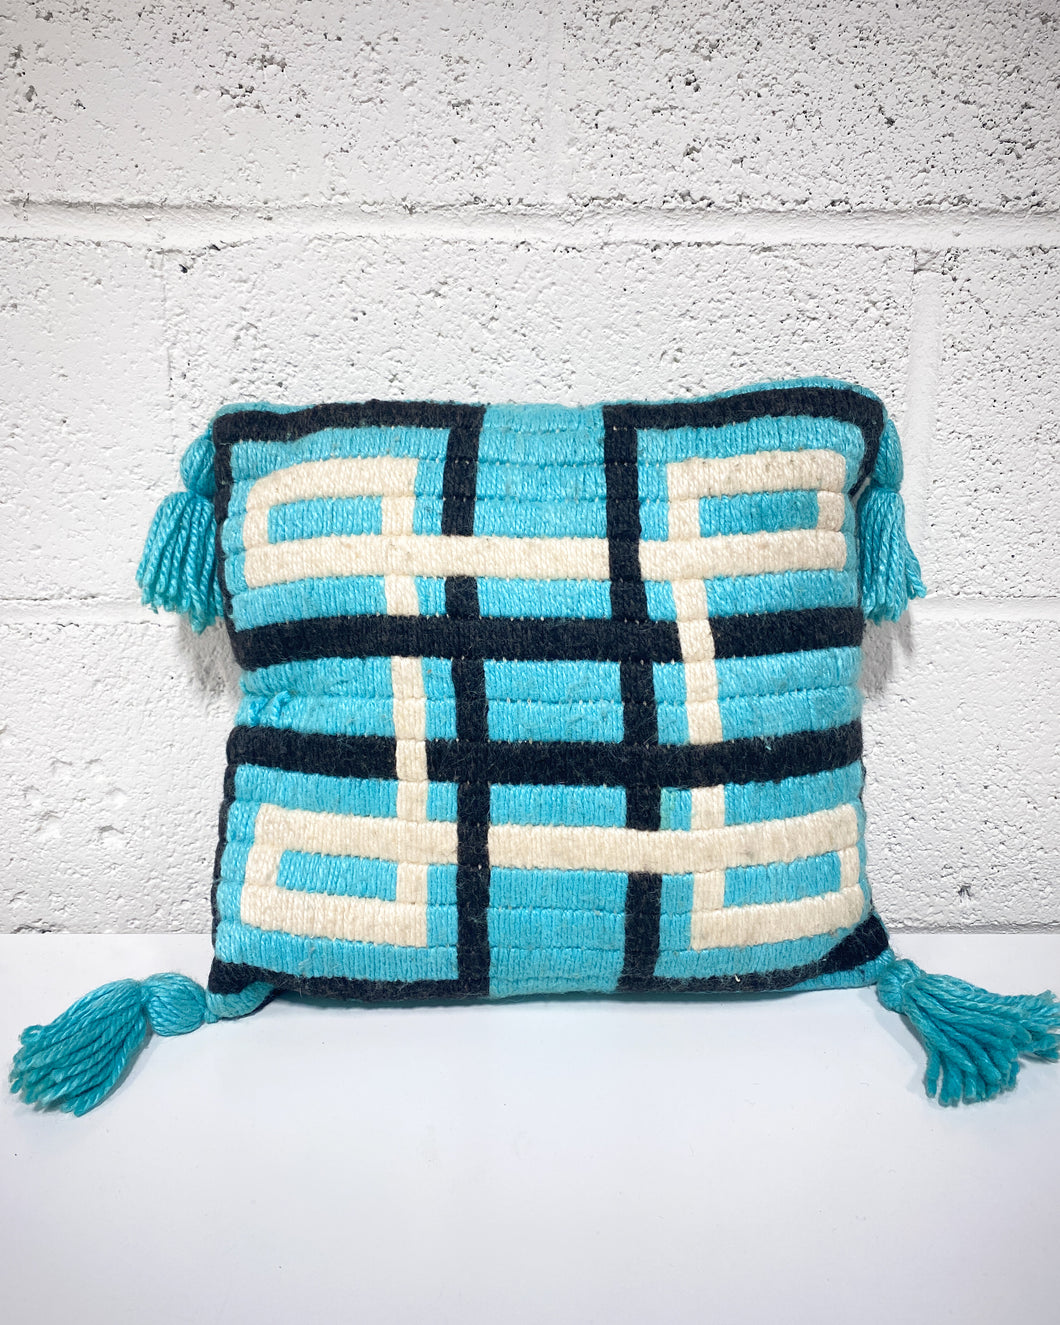 Vintage Blue Woven Pillow with Tassels